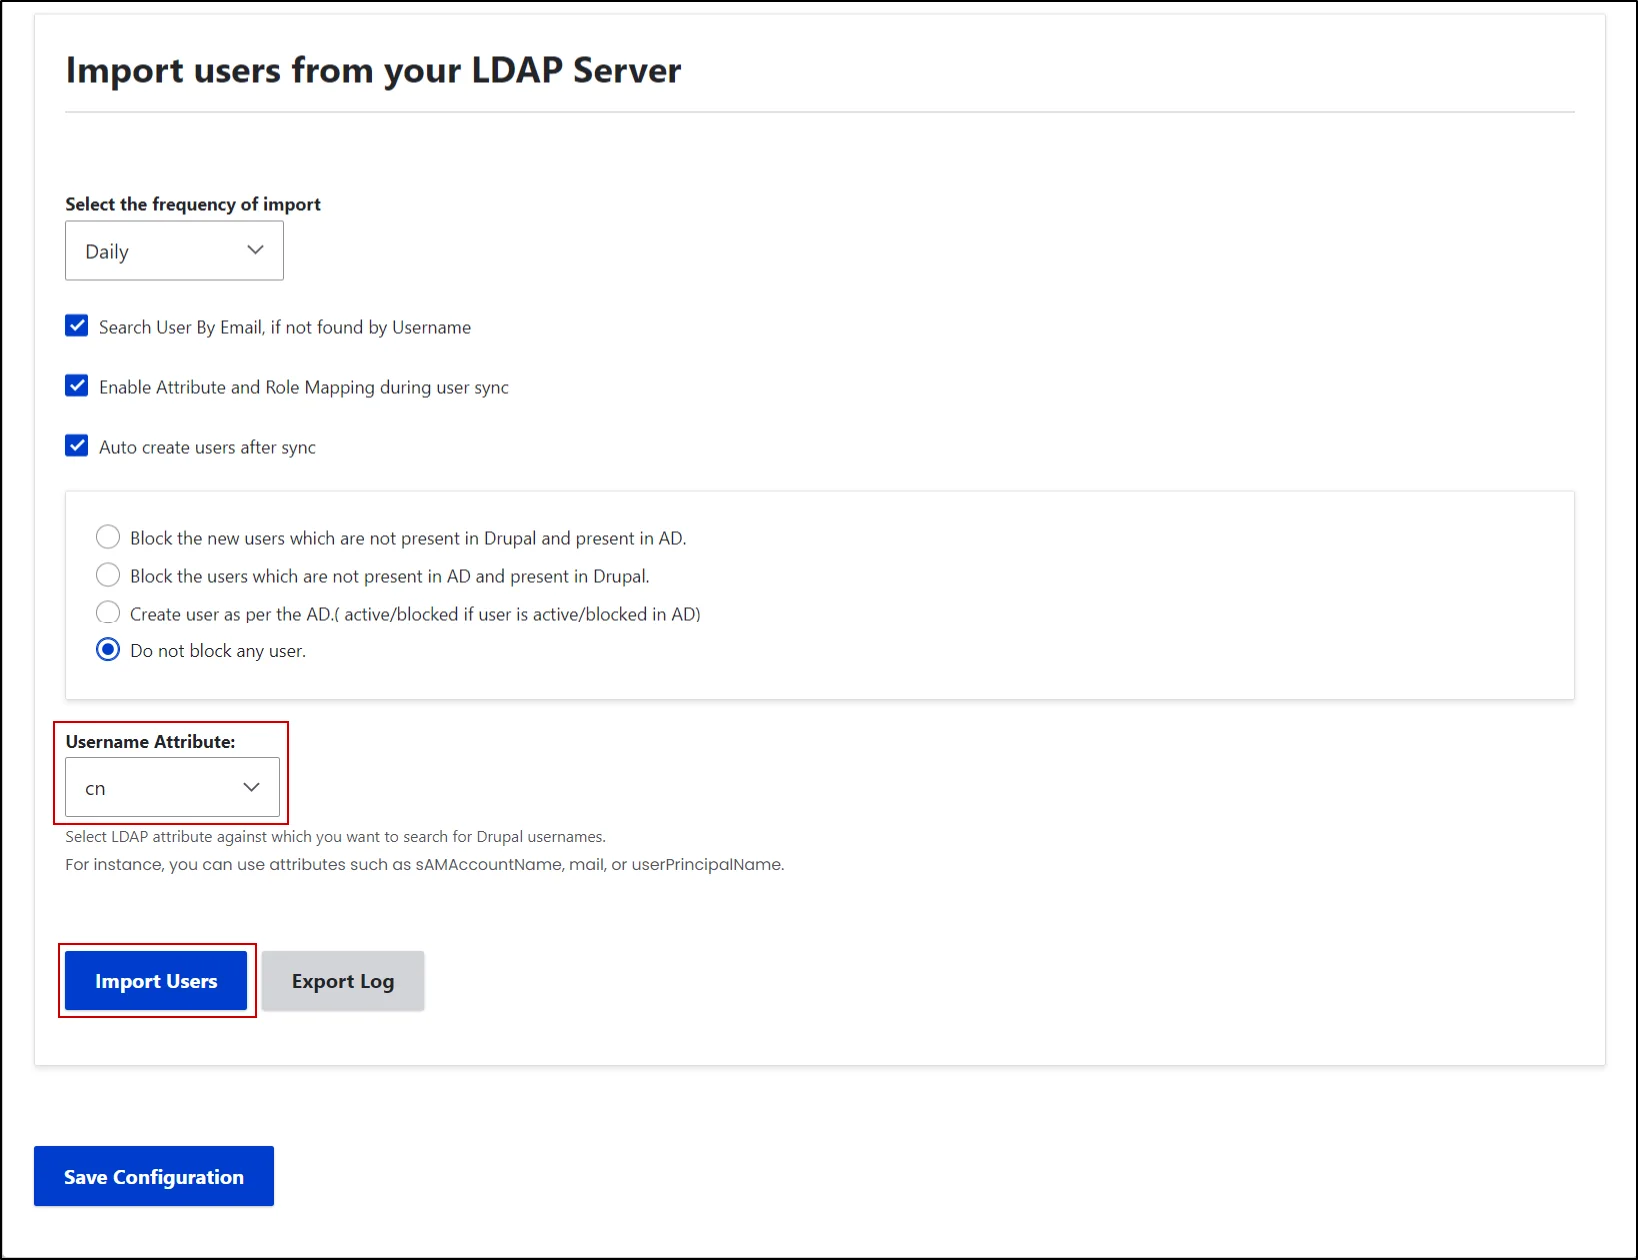 Import users from LDAP to Drupal - Select Username Attribute and click on Import Users button